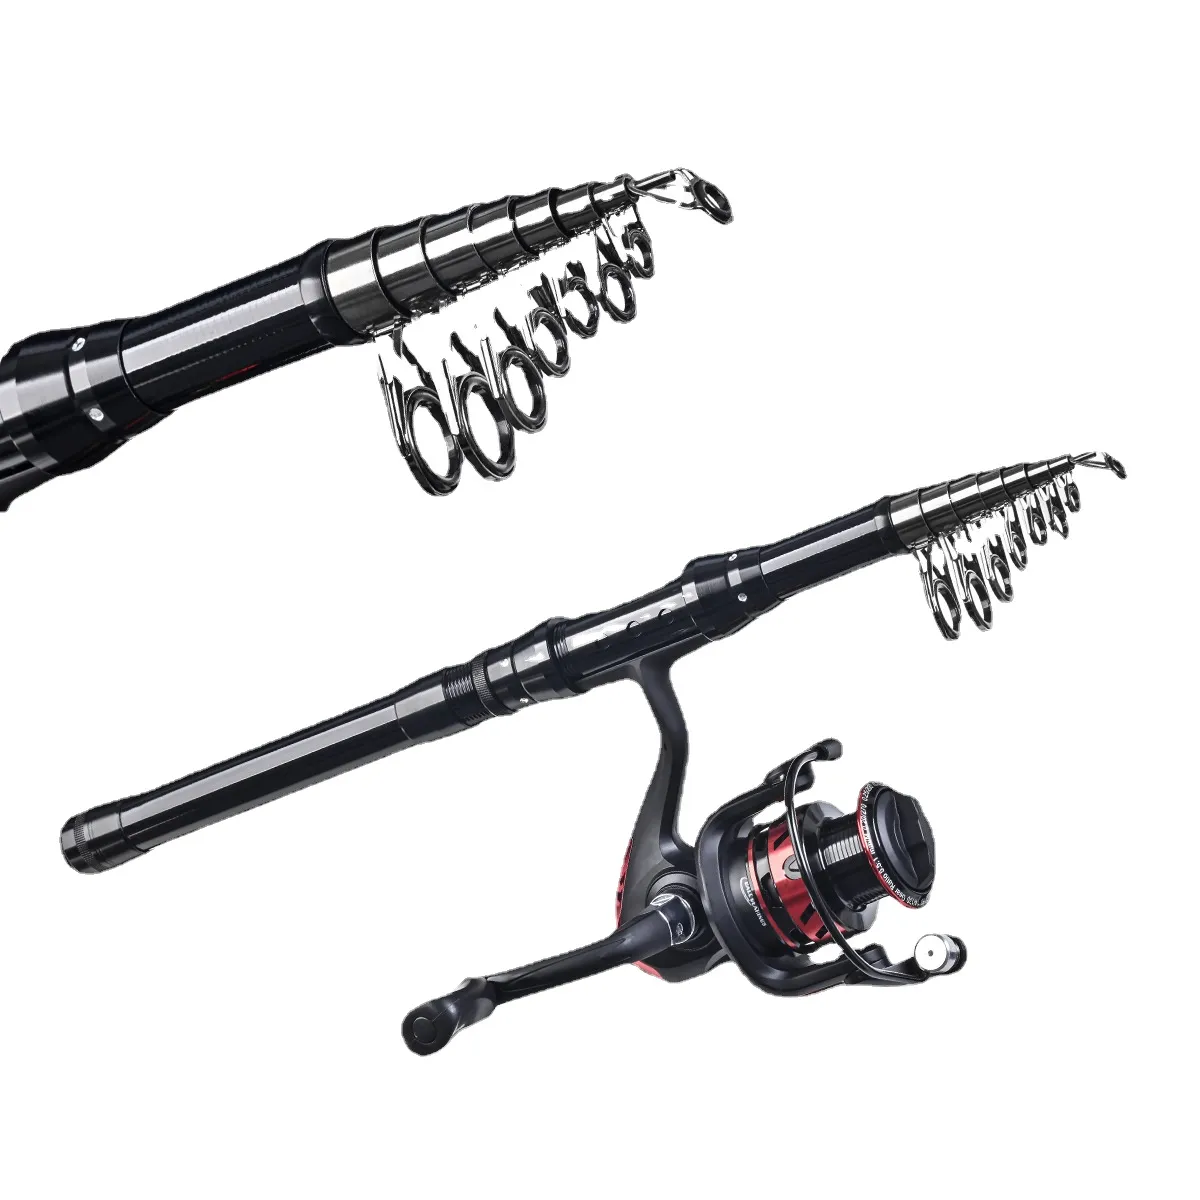 Spinning Fishing Rod and Reel Combo1.8M 2.7MTelescopic Rod with Fishign  Reel Max Drag 5kg Full Fishing Kit